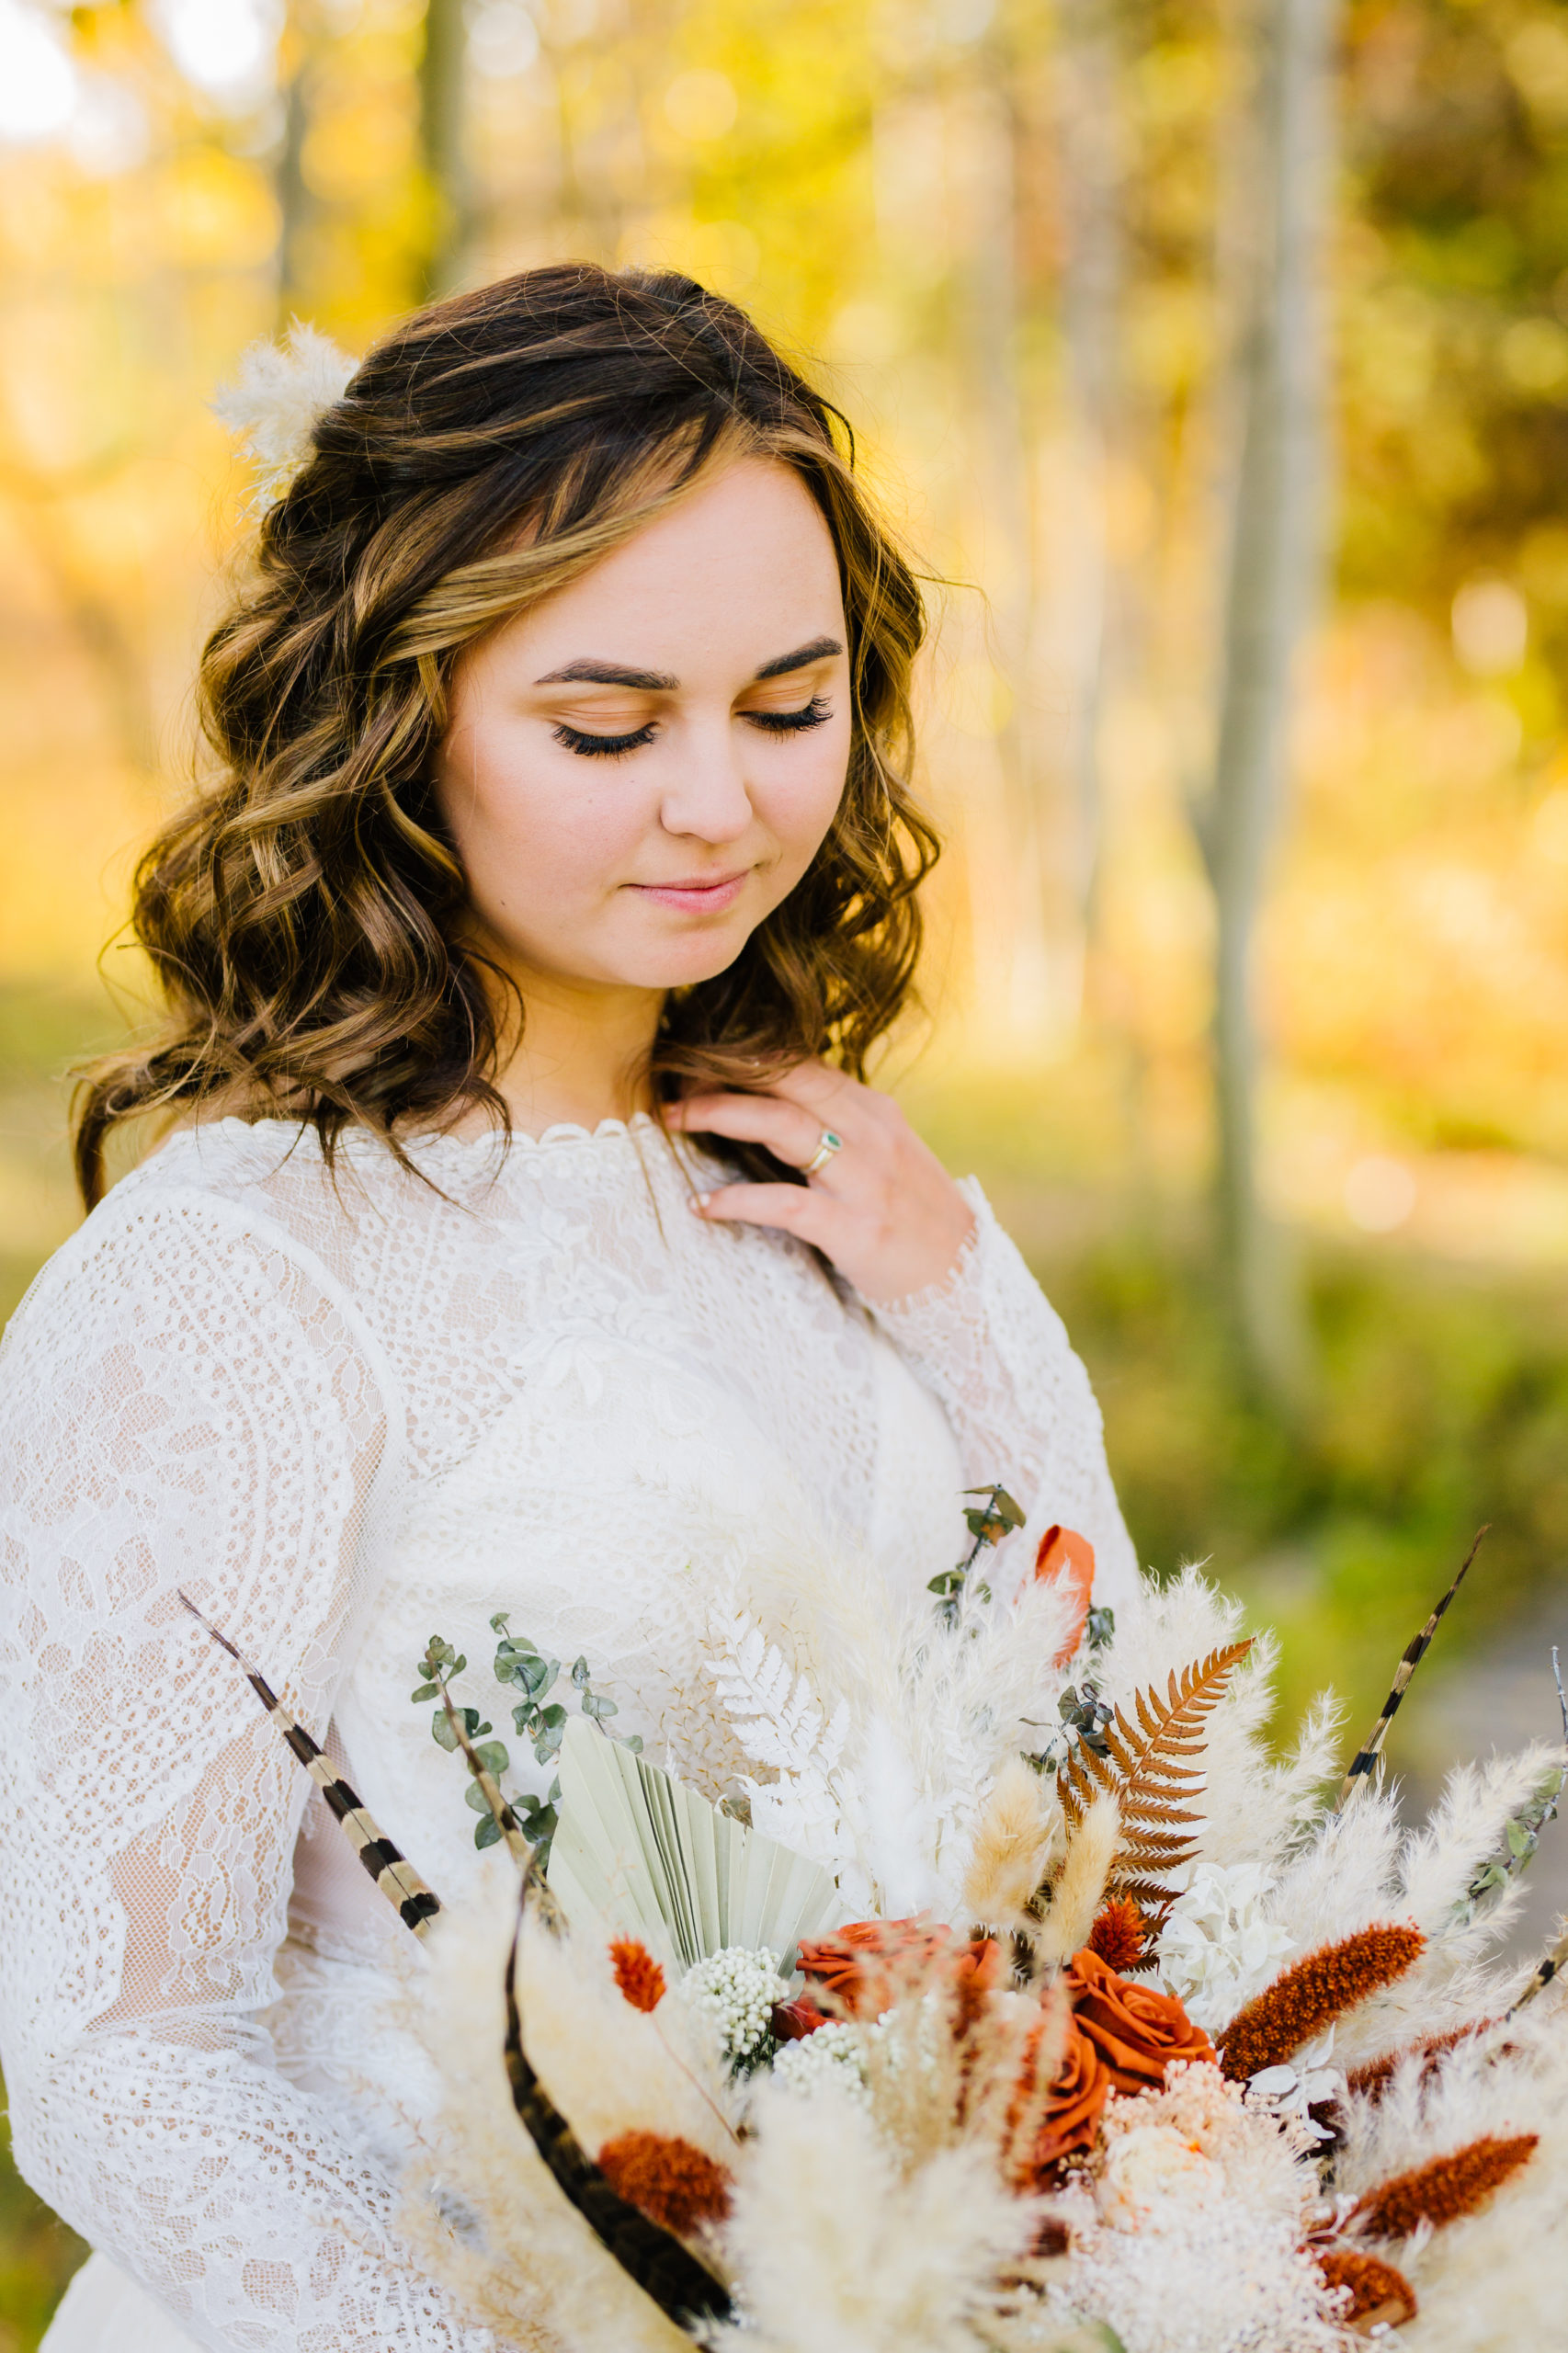 bride in a lace wedding dress and curled hair holding her wedding bouquet and looking down